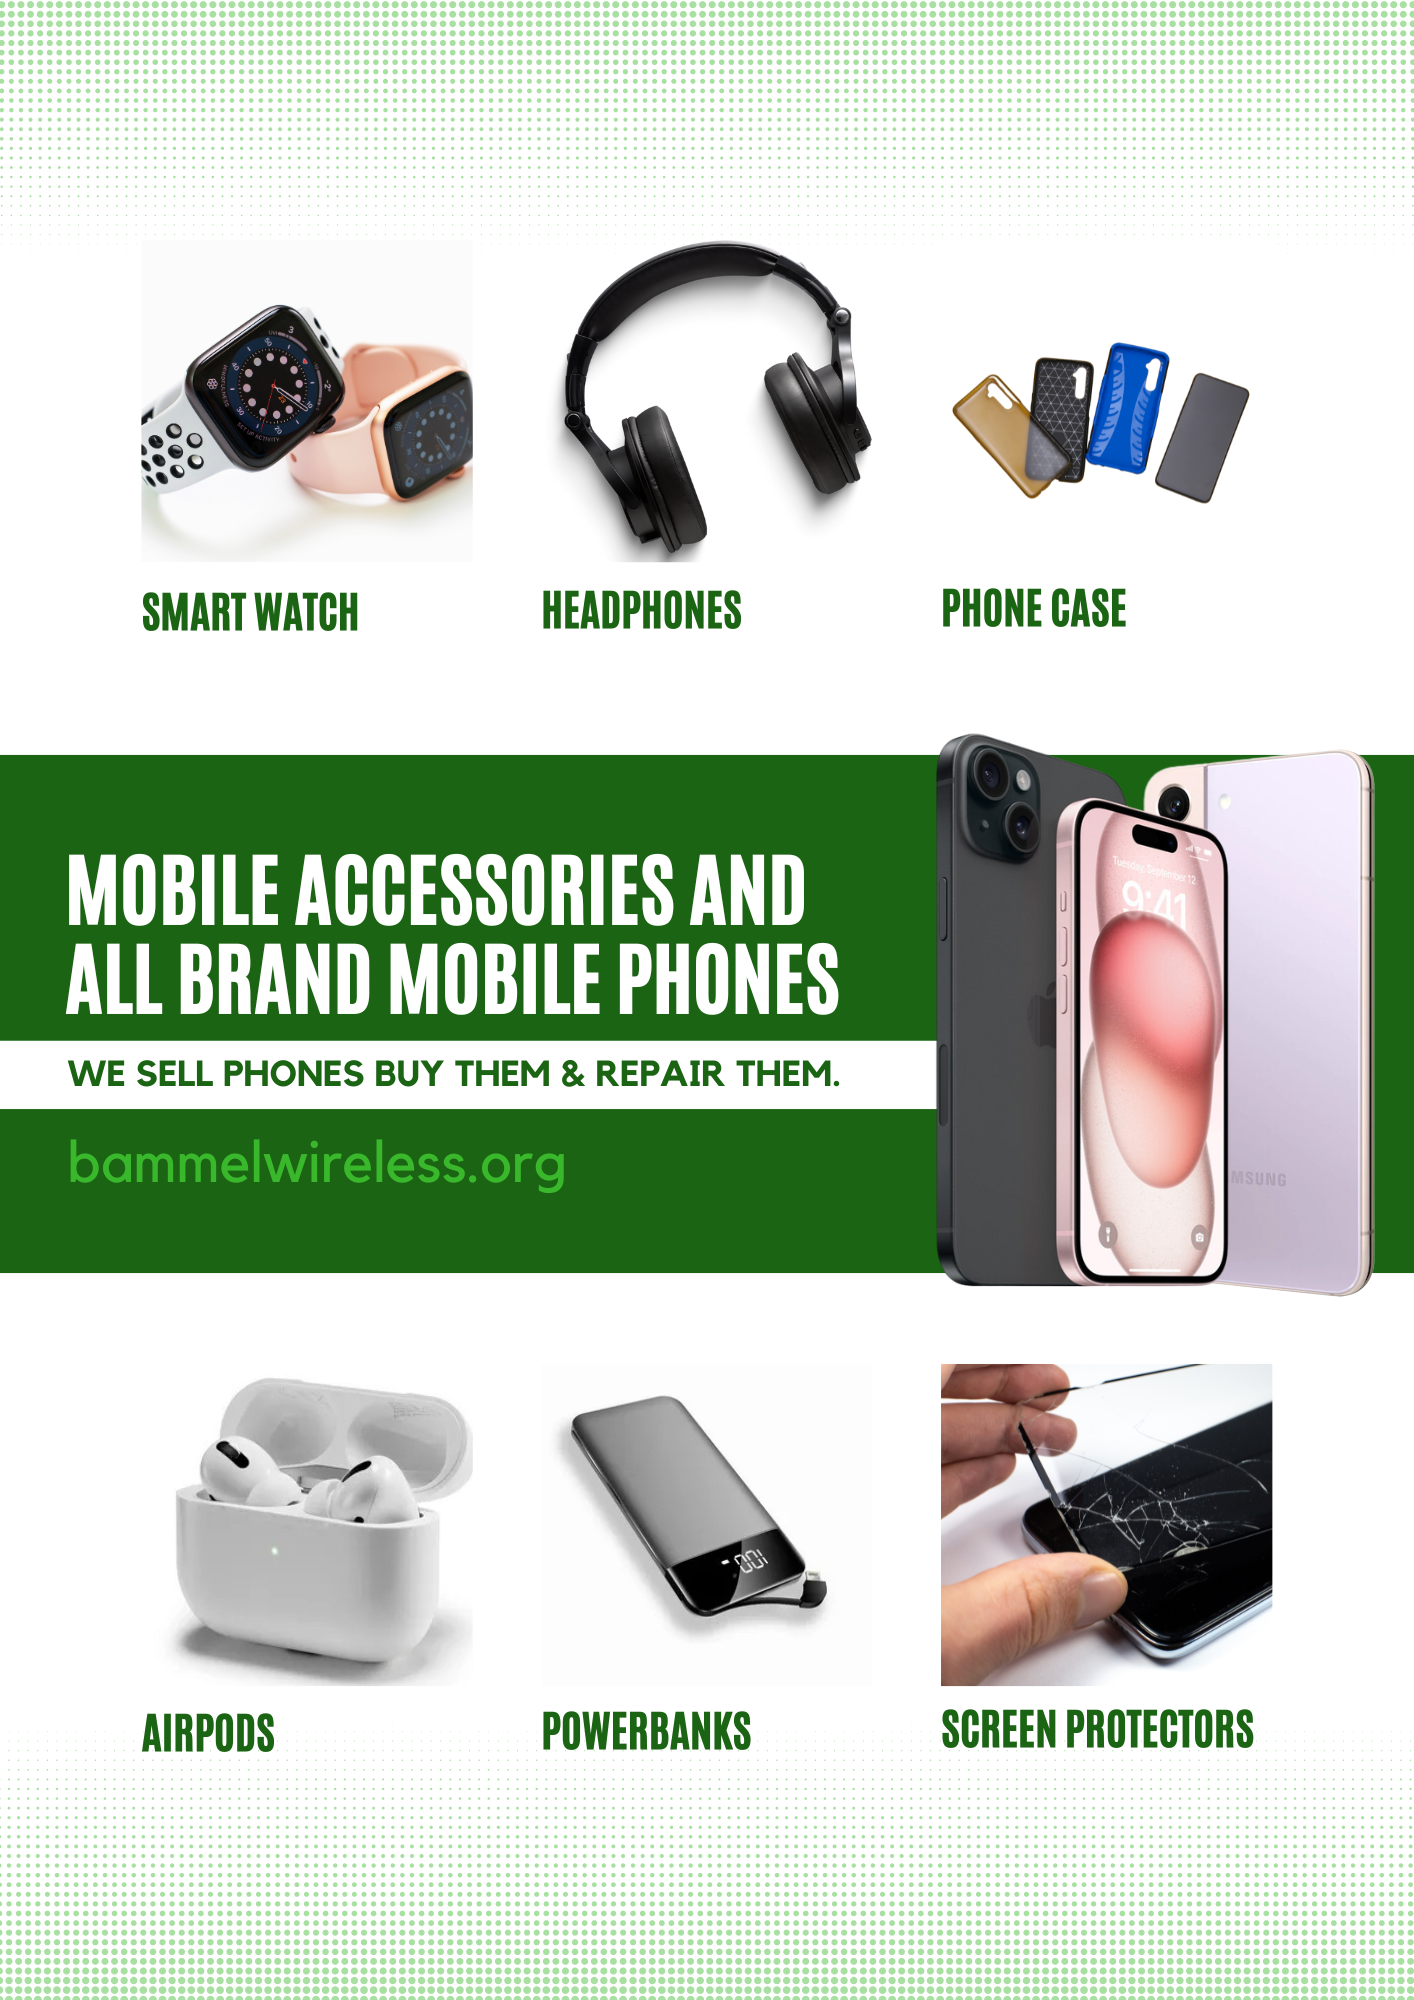 mOBILE ACCESSORIES AND ALL BRAND MOBILE PHONES